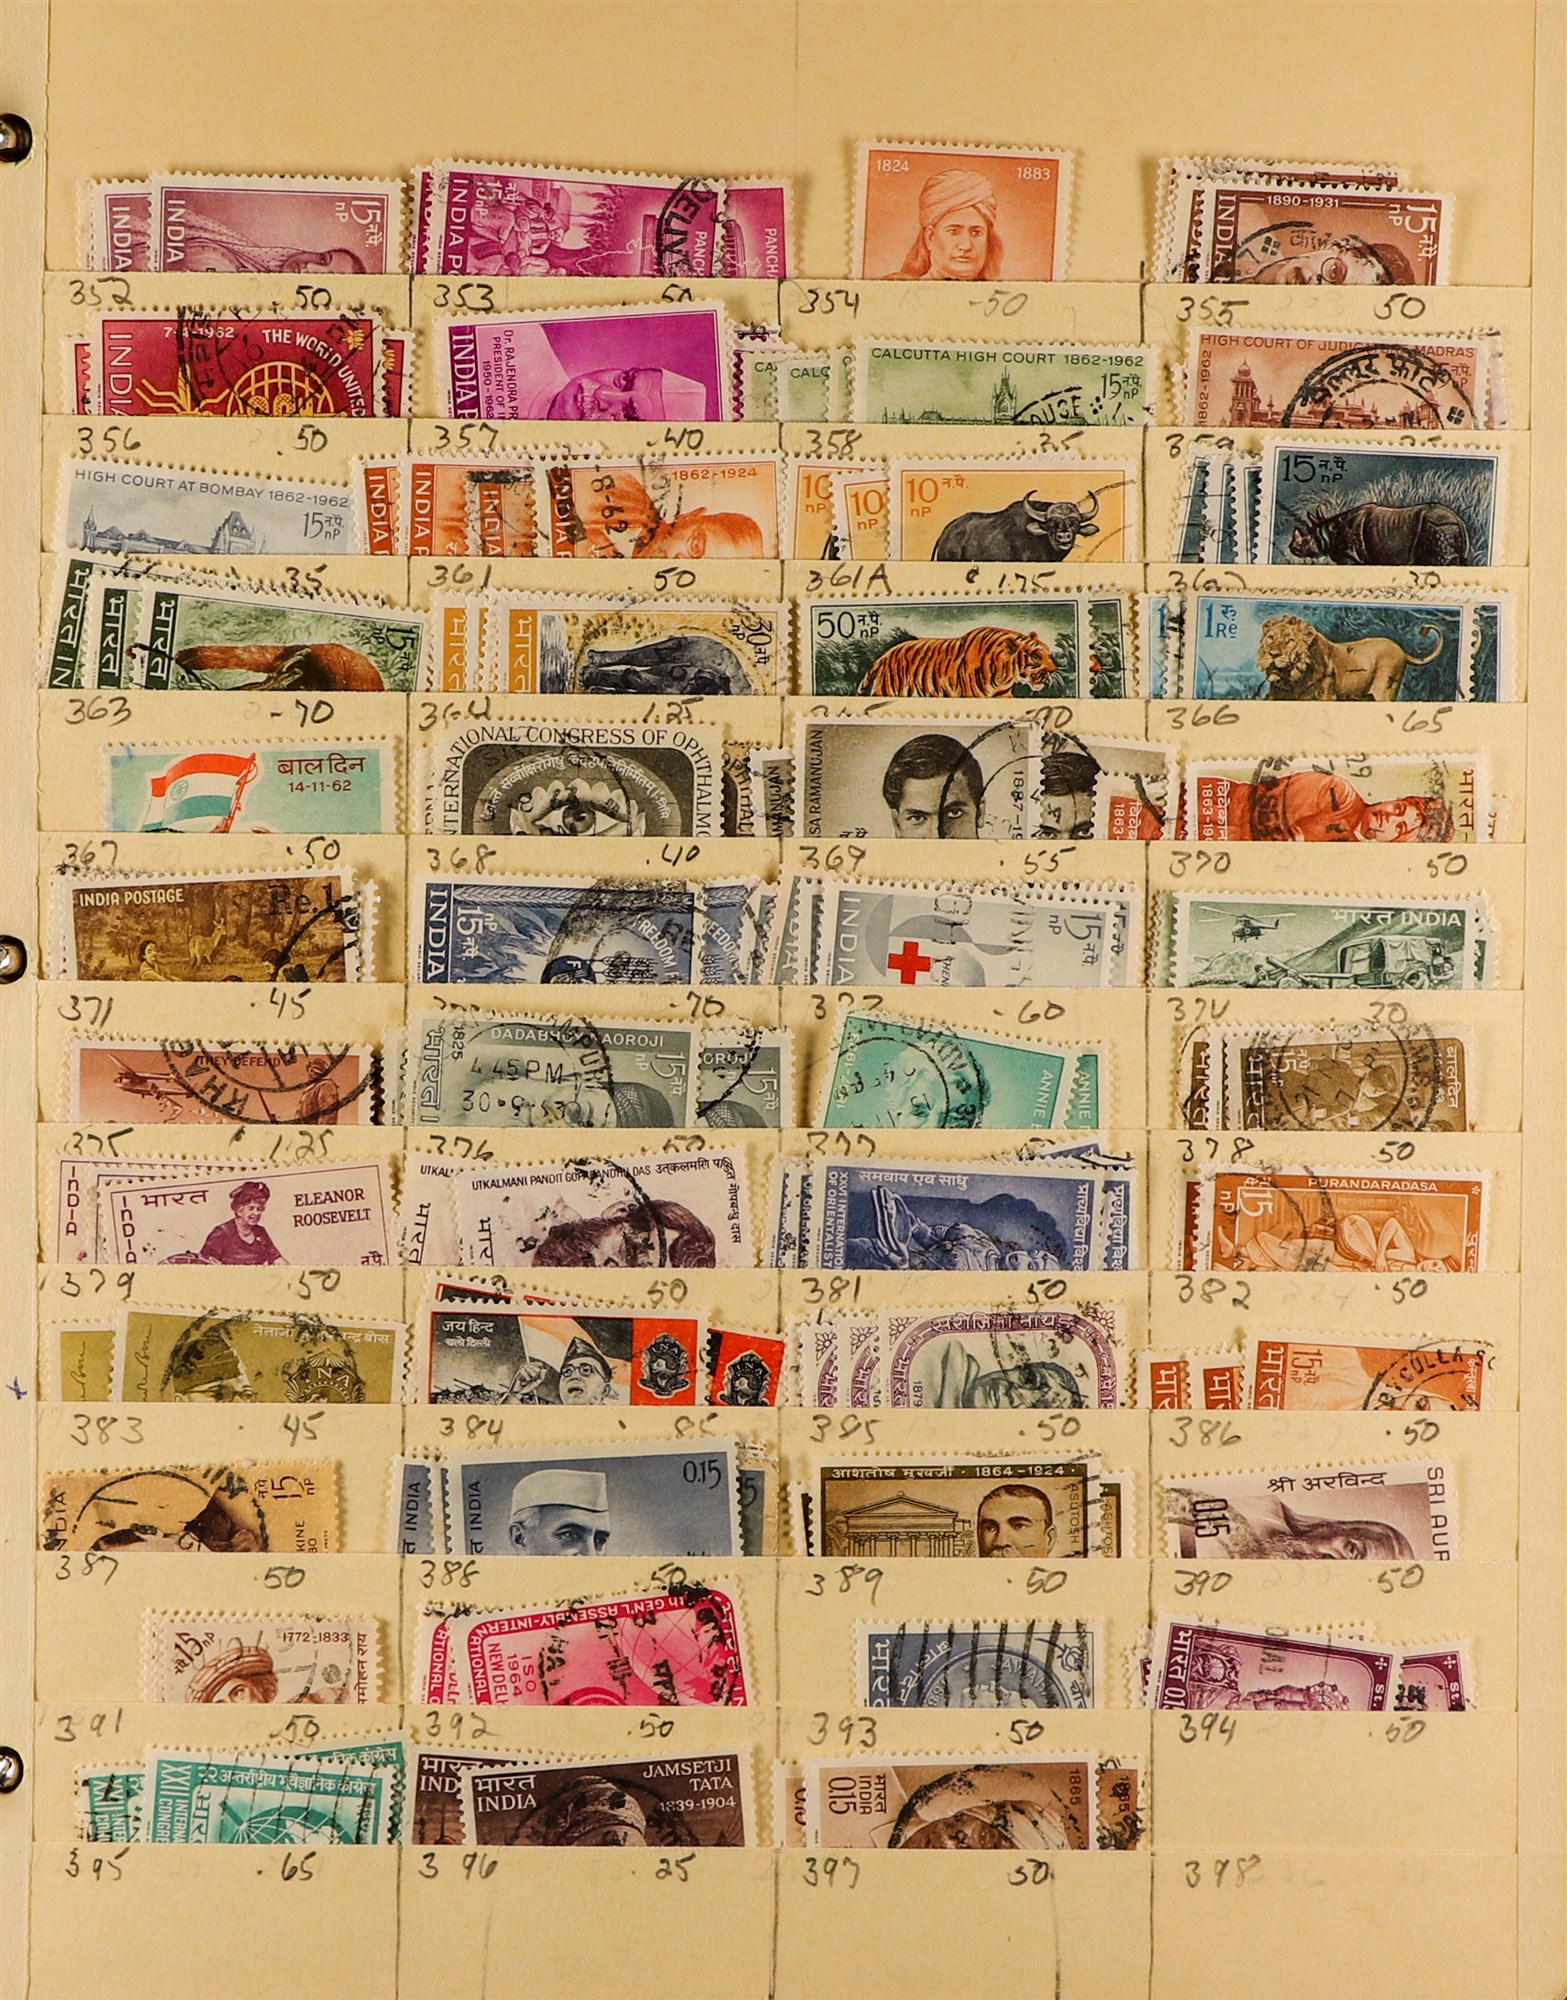 INDIA 1865 - 2005 IN BINDER chiefly used stamps tucked onto old manilla stock pages, in 3-ring - Image 6 of 11